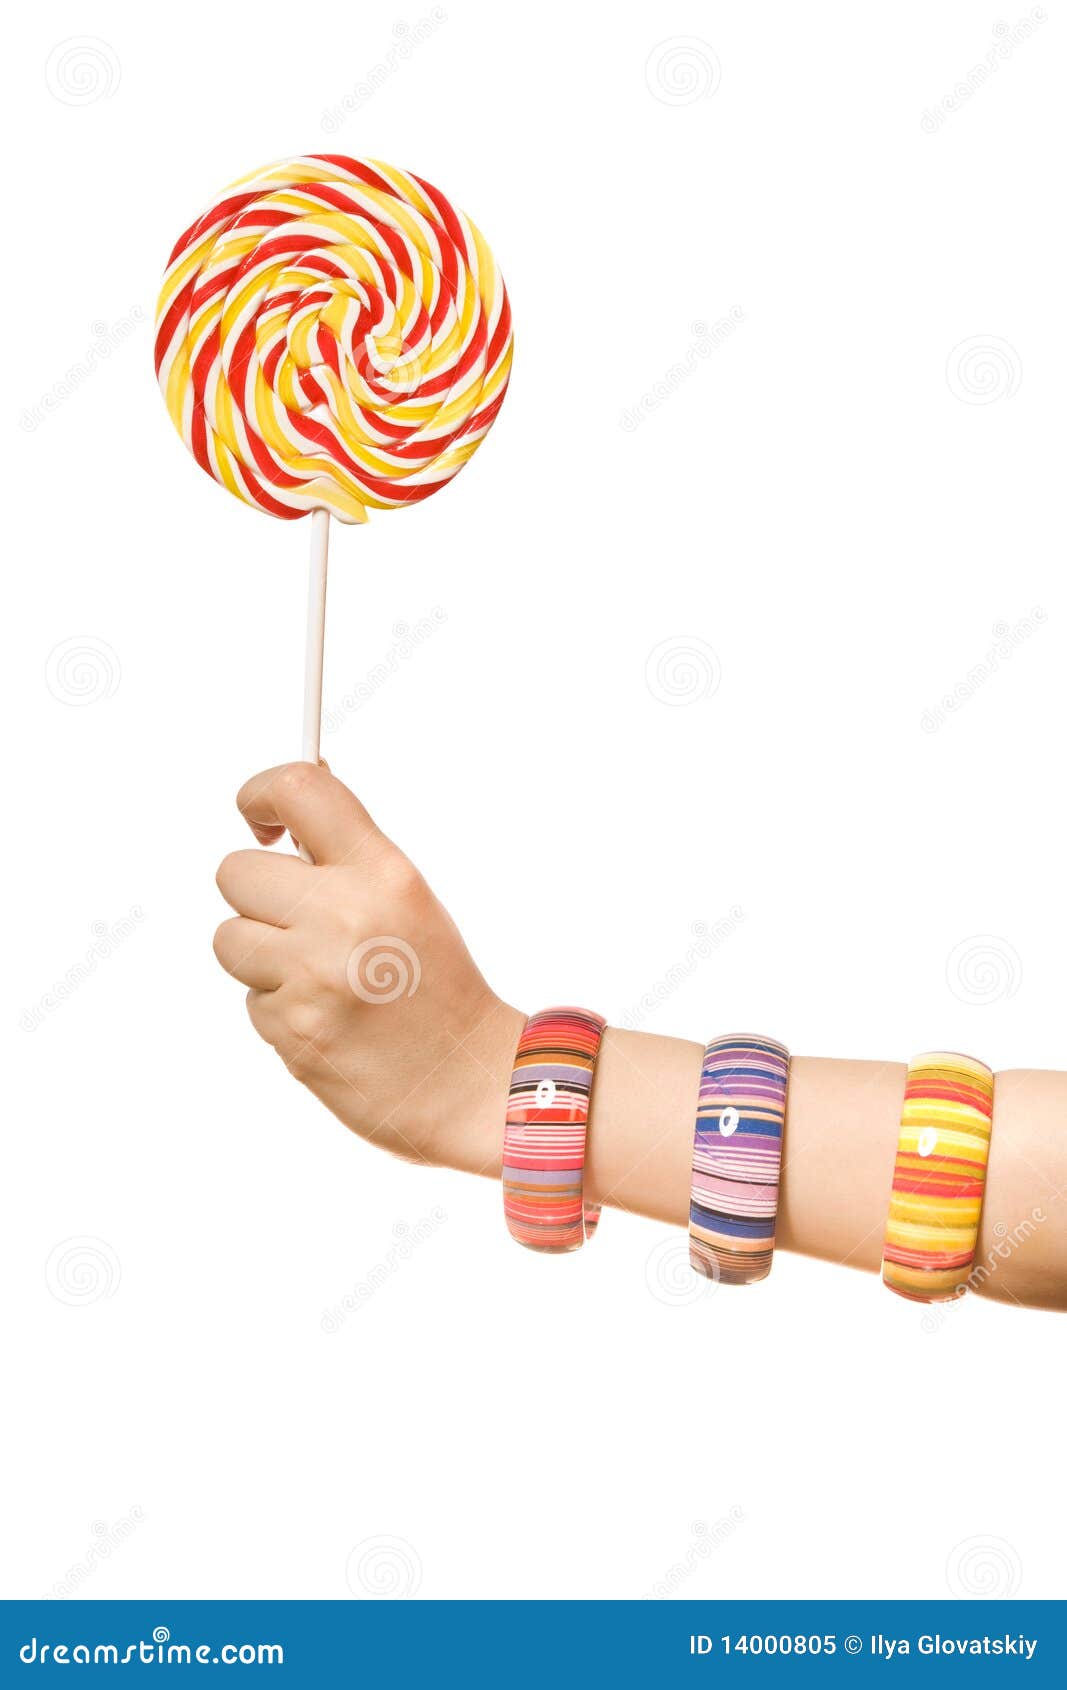 Woman S Hands with Lollipop Stock Image - Image of swirl, colorful ...